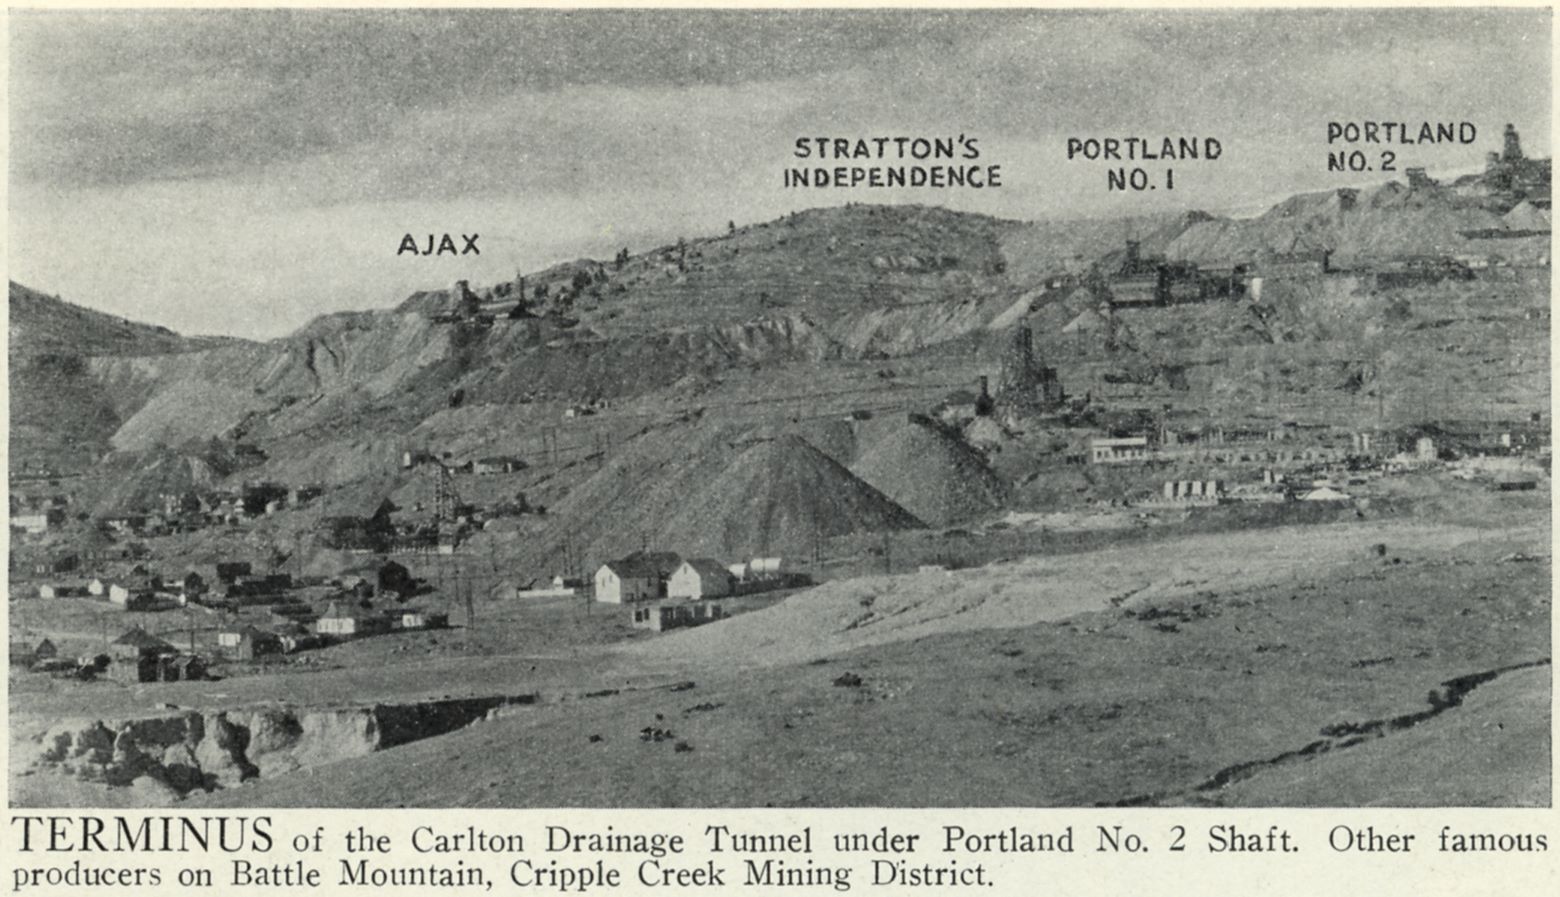 TERMINUS of the Carlton Drainage Tunnel under Portland No. 2 Shaft. Other famous producers on Battle Mountain, Cripple Creek Mining District.